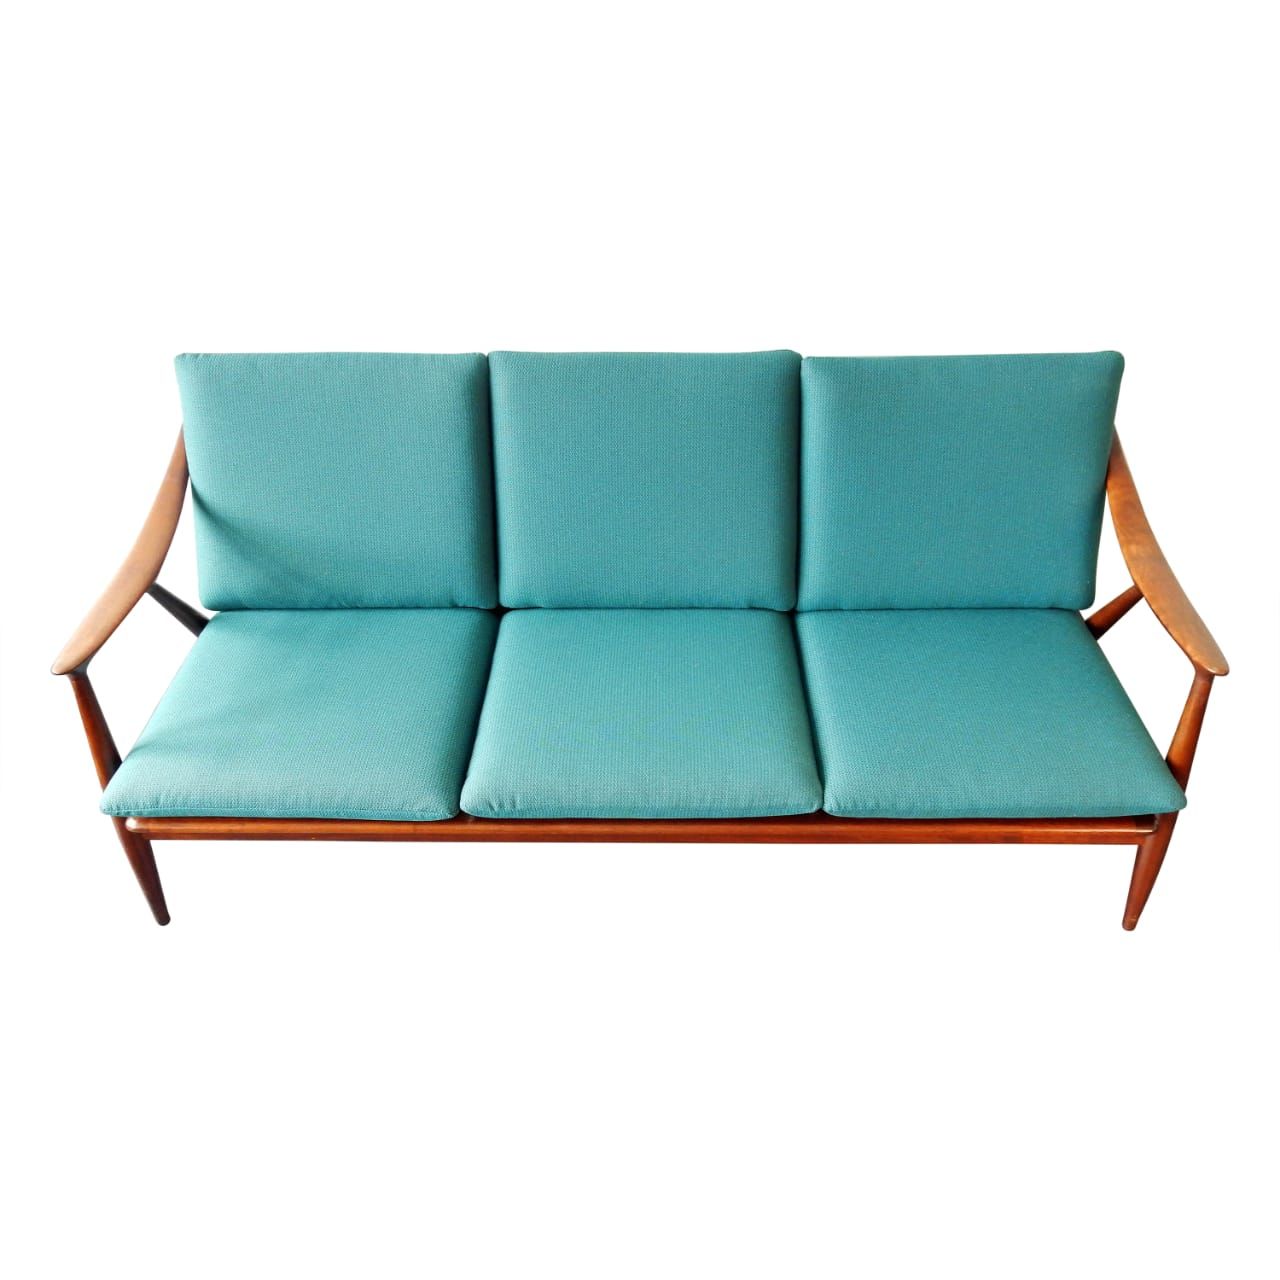 Mid Century 3 Seat Sofade Ster Gelderland, Holland For Sale At 1stdibs Within Mid Century 3 Seat Couches (View 9 of 20)